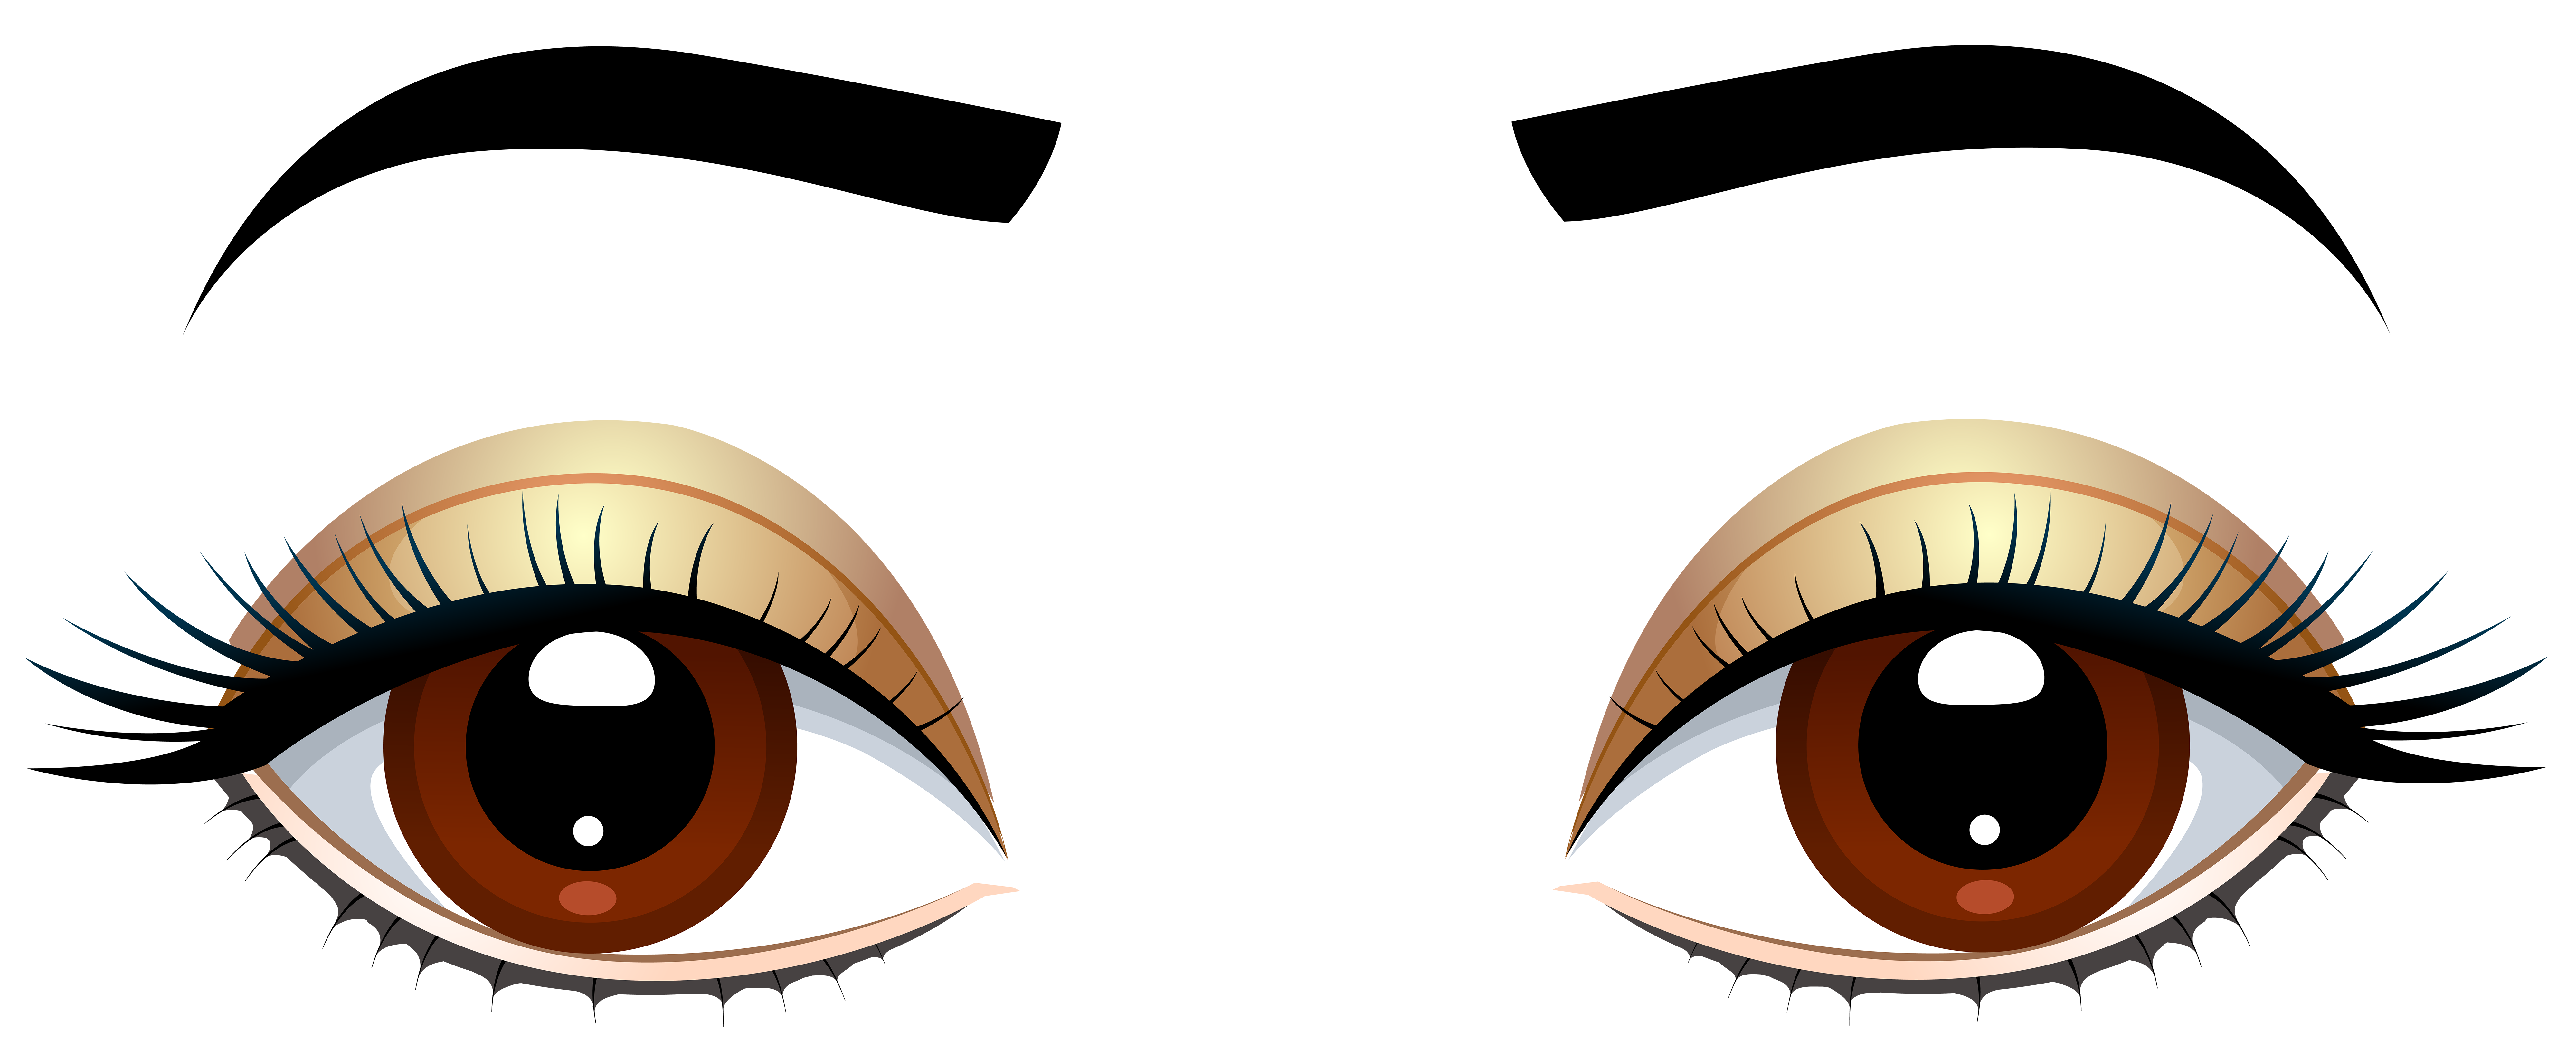 Brown with eyebrows png. Eyes clipart